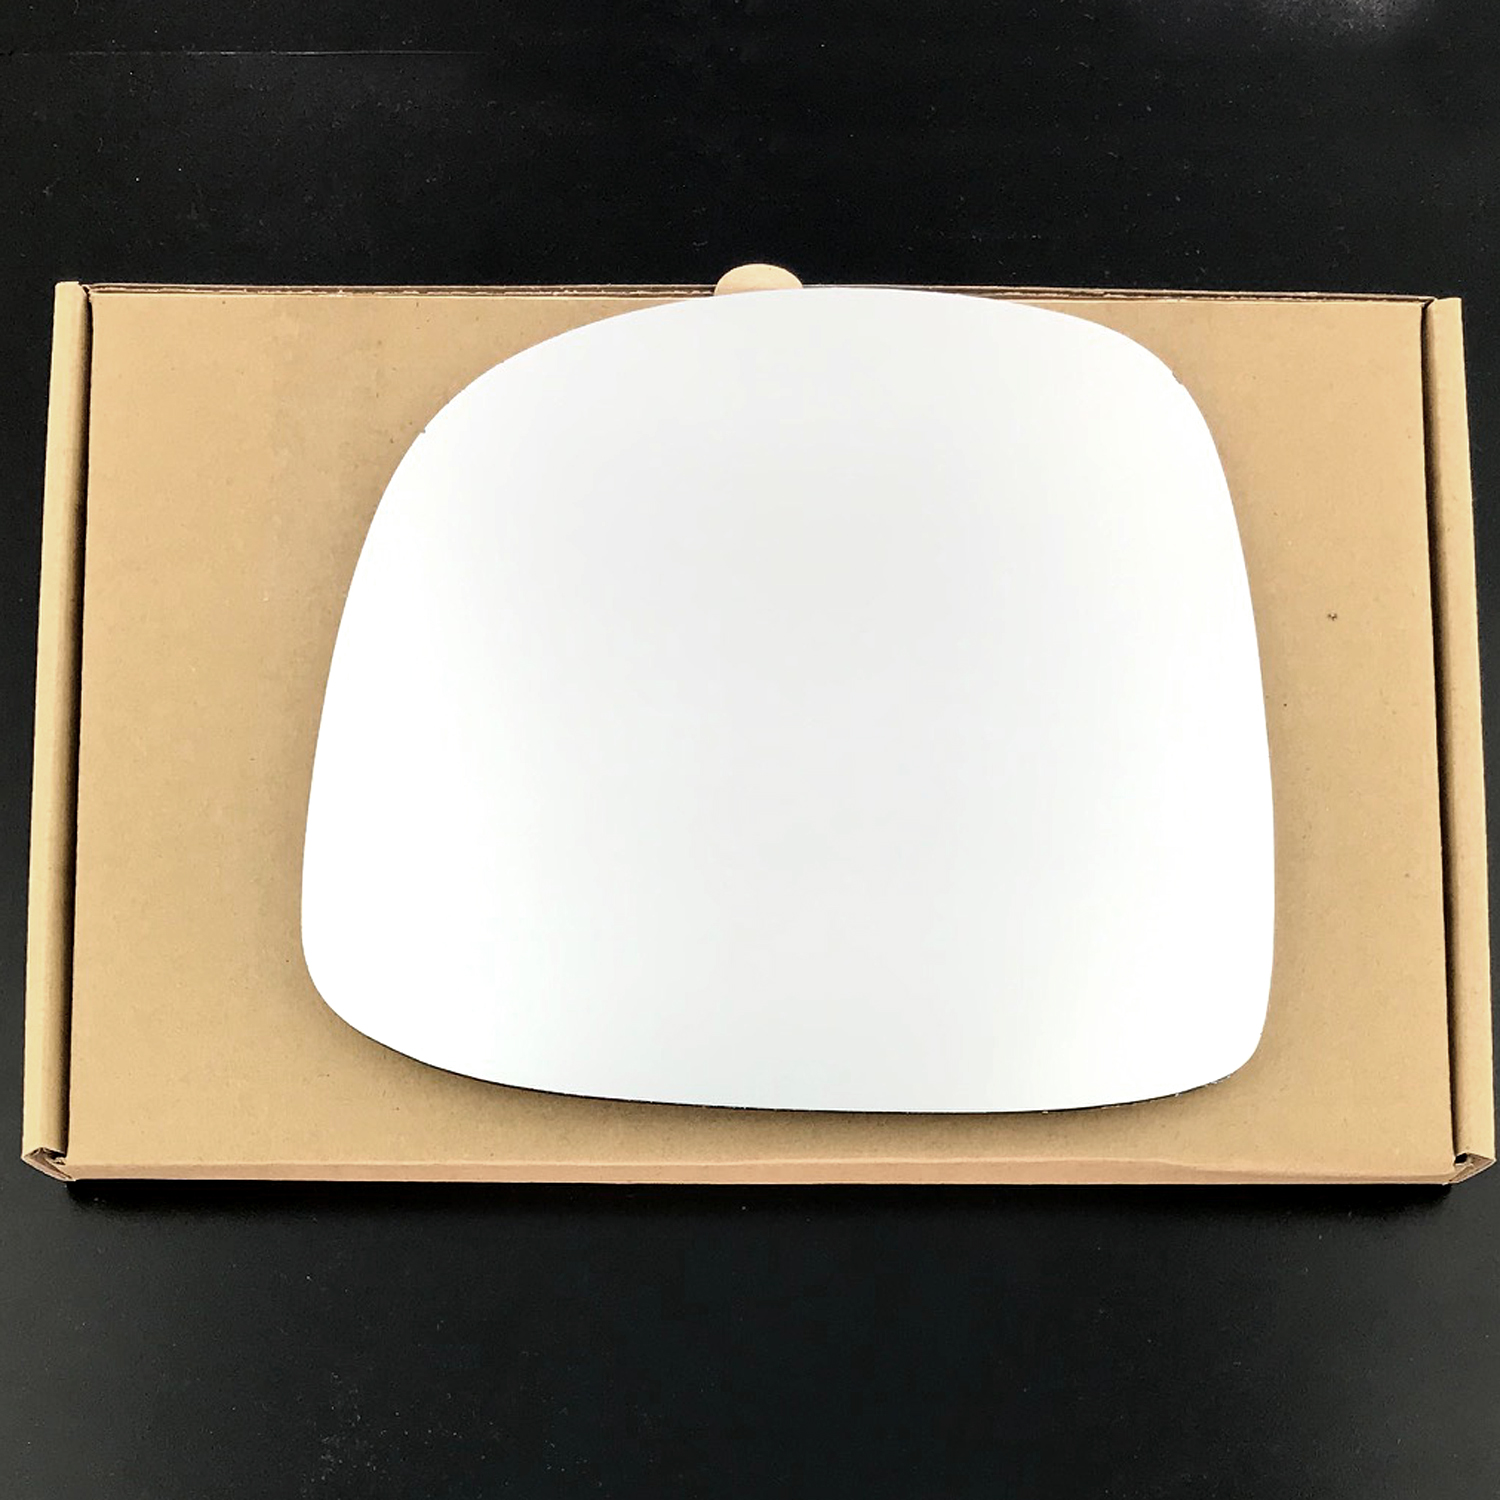 Mercedes Vito Wing Mirror Glass RIGHT HAND ( UK Driver Side ) 2004 to 2010 – Convex Wing Mirror